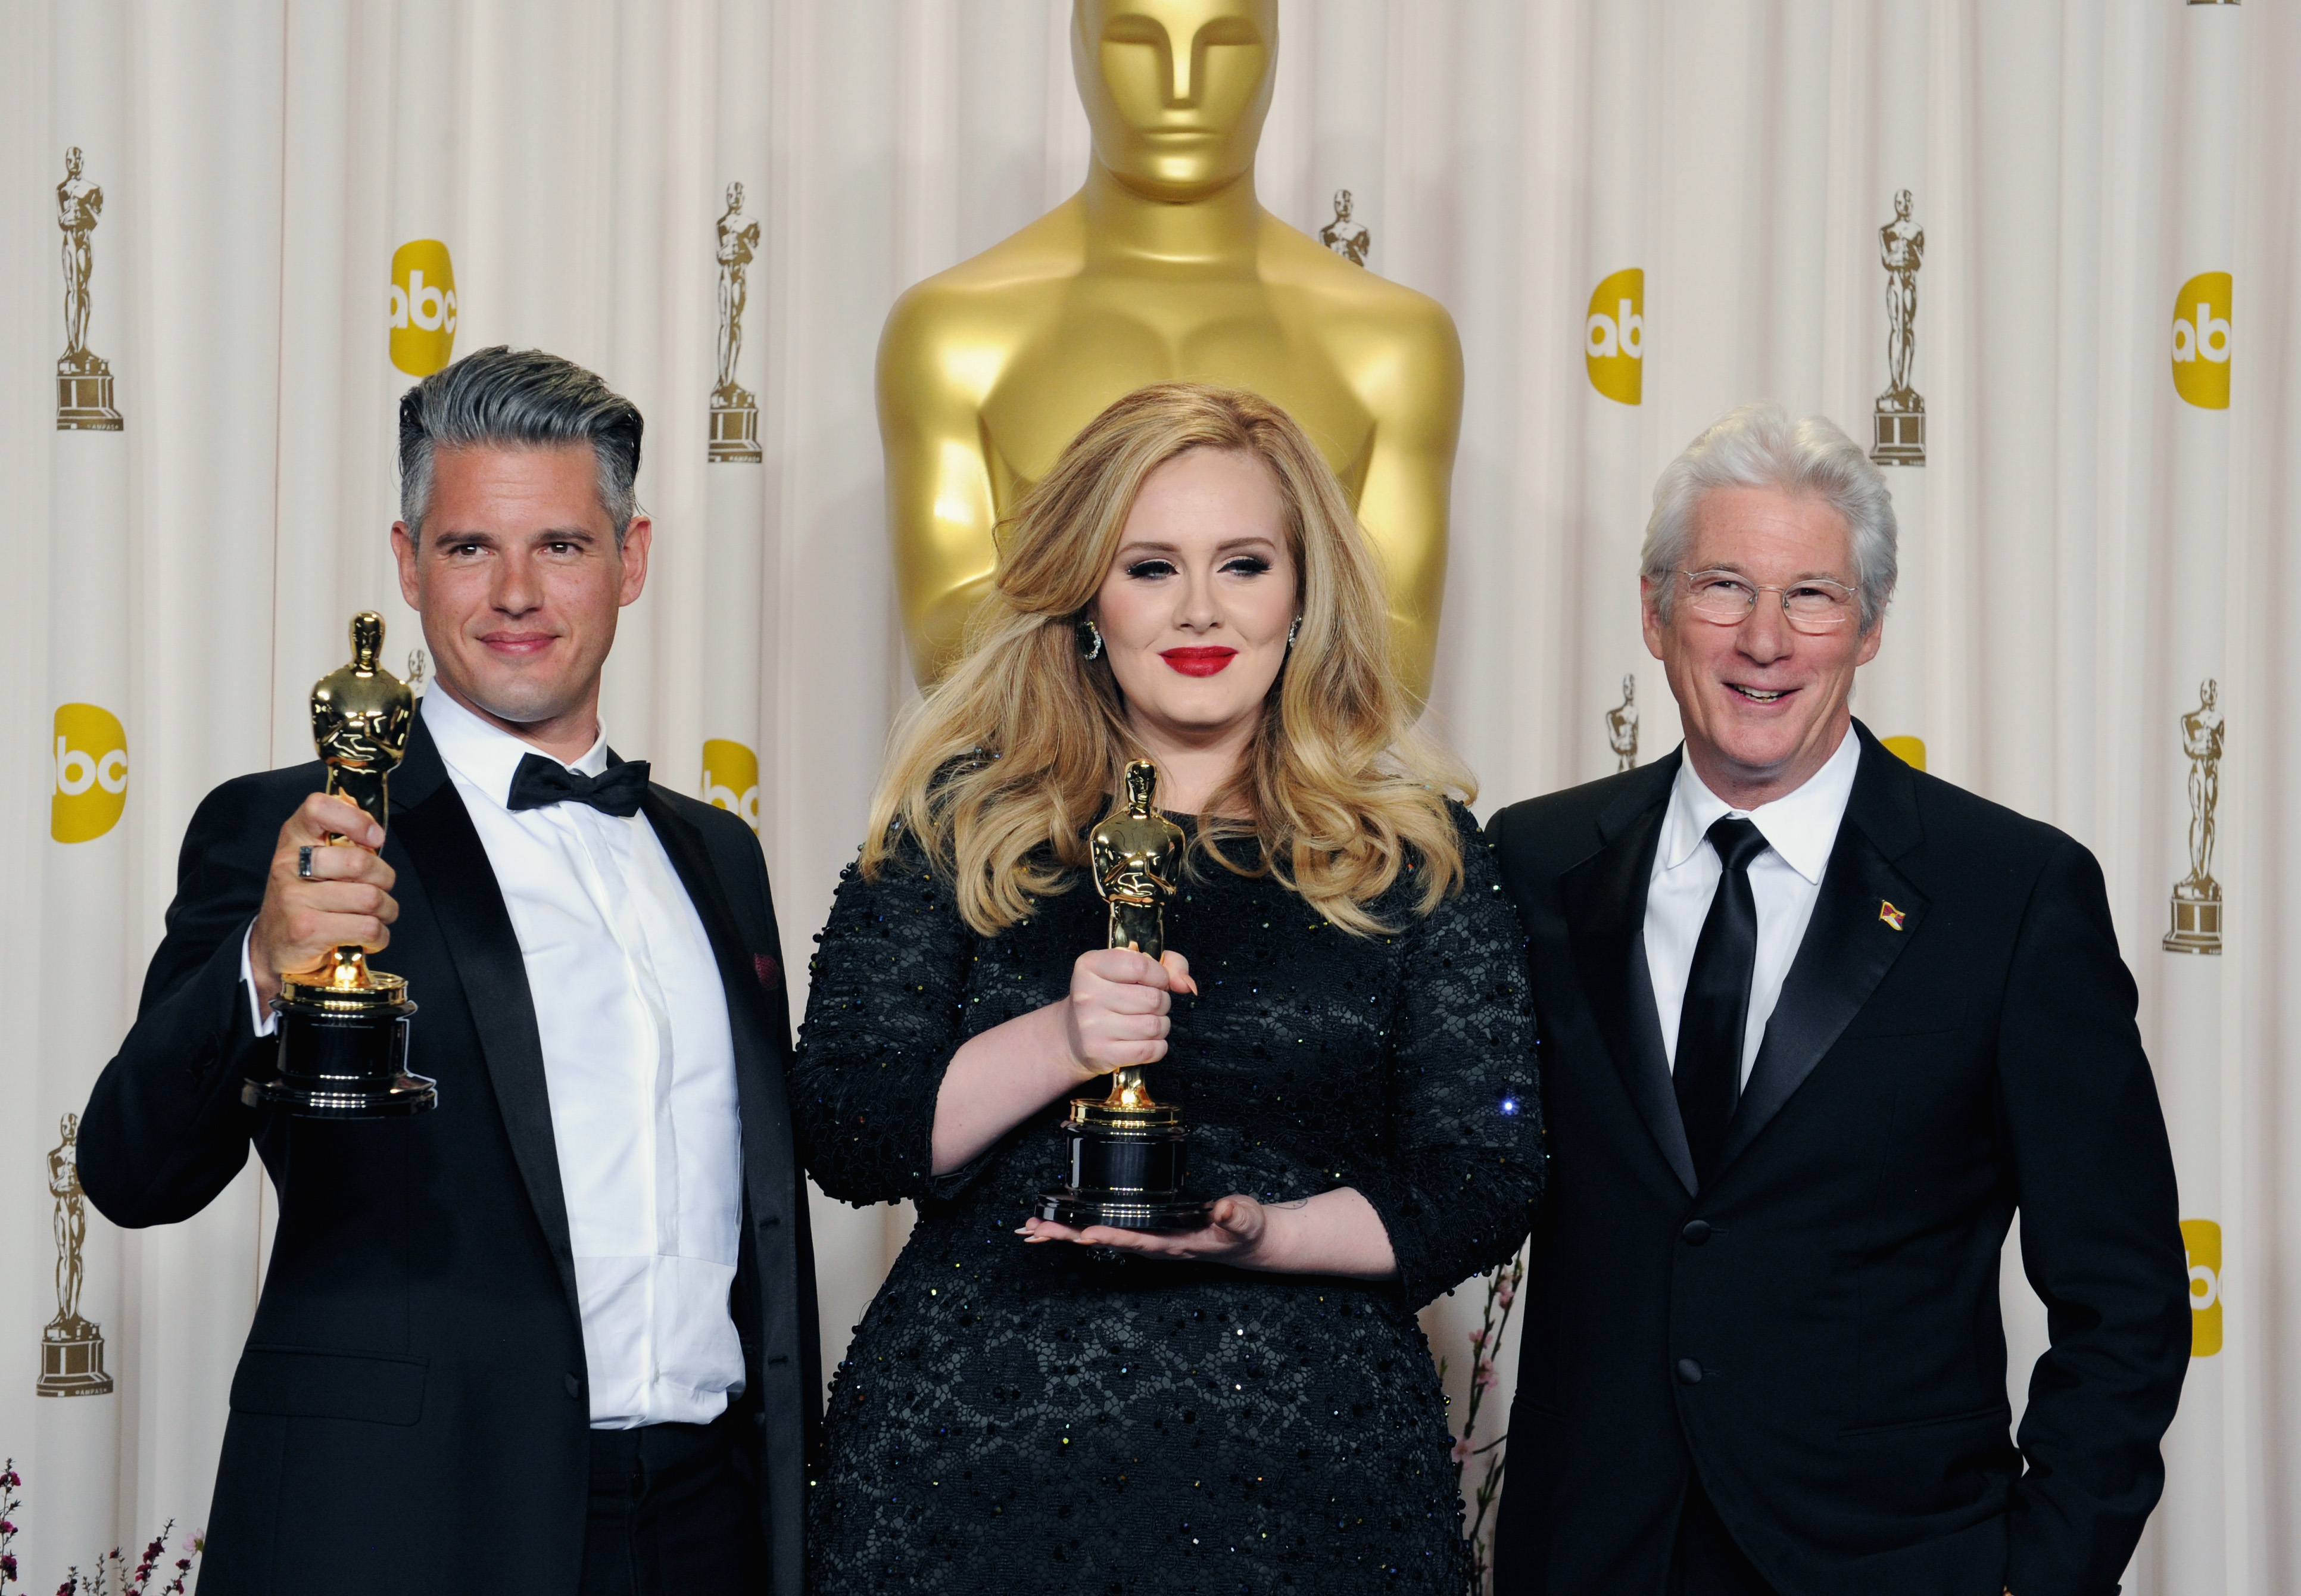 Paul Epworth, Adele and Richard Gere pose in the press room during the Oscars at the Loews Hollywood Hotel on February 24, 2013 in Hollywood, California.| Source: Getty Images